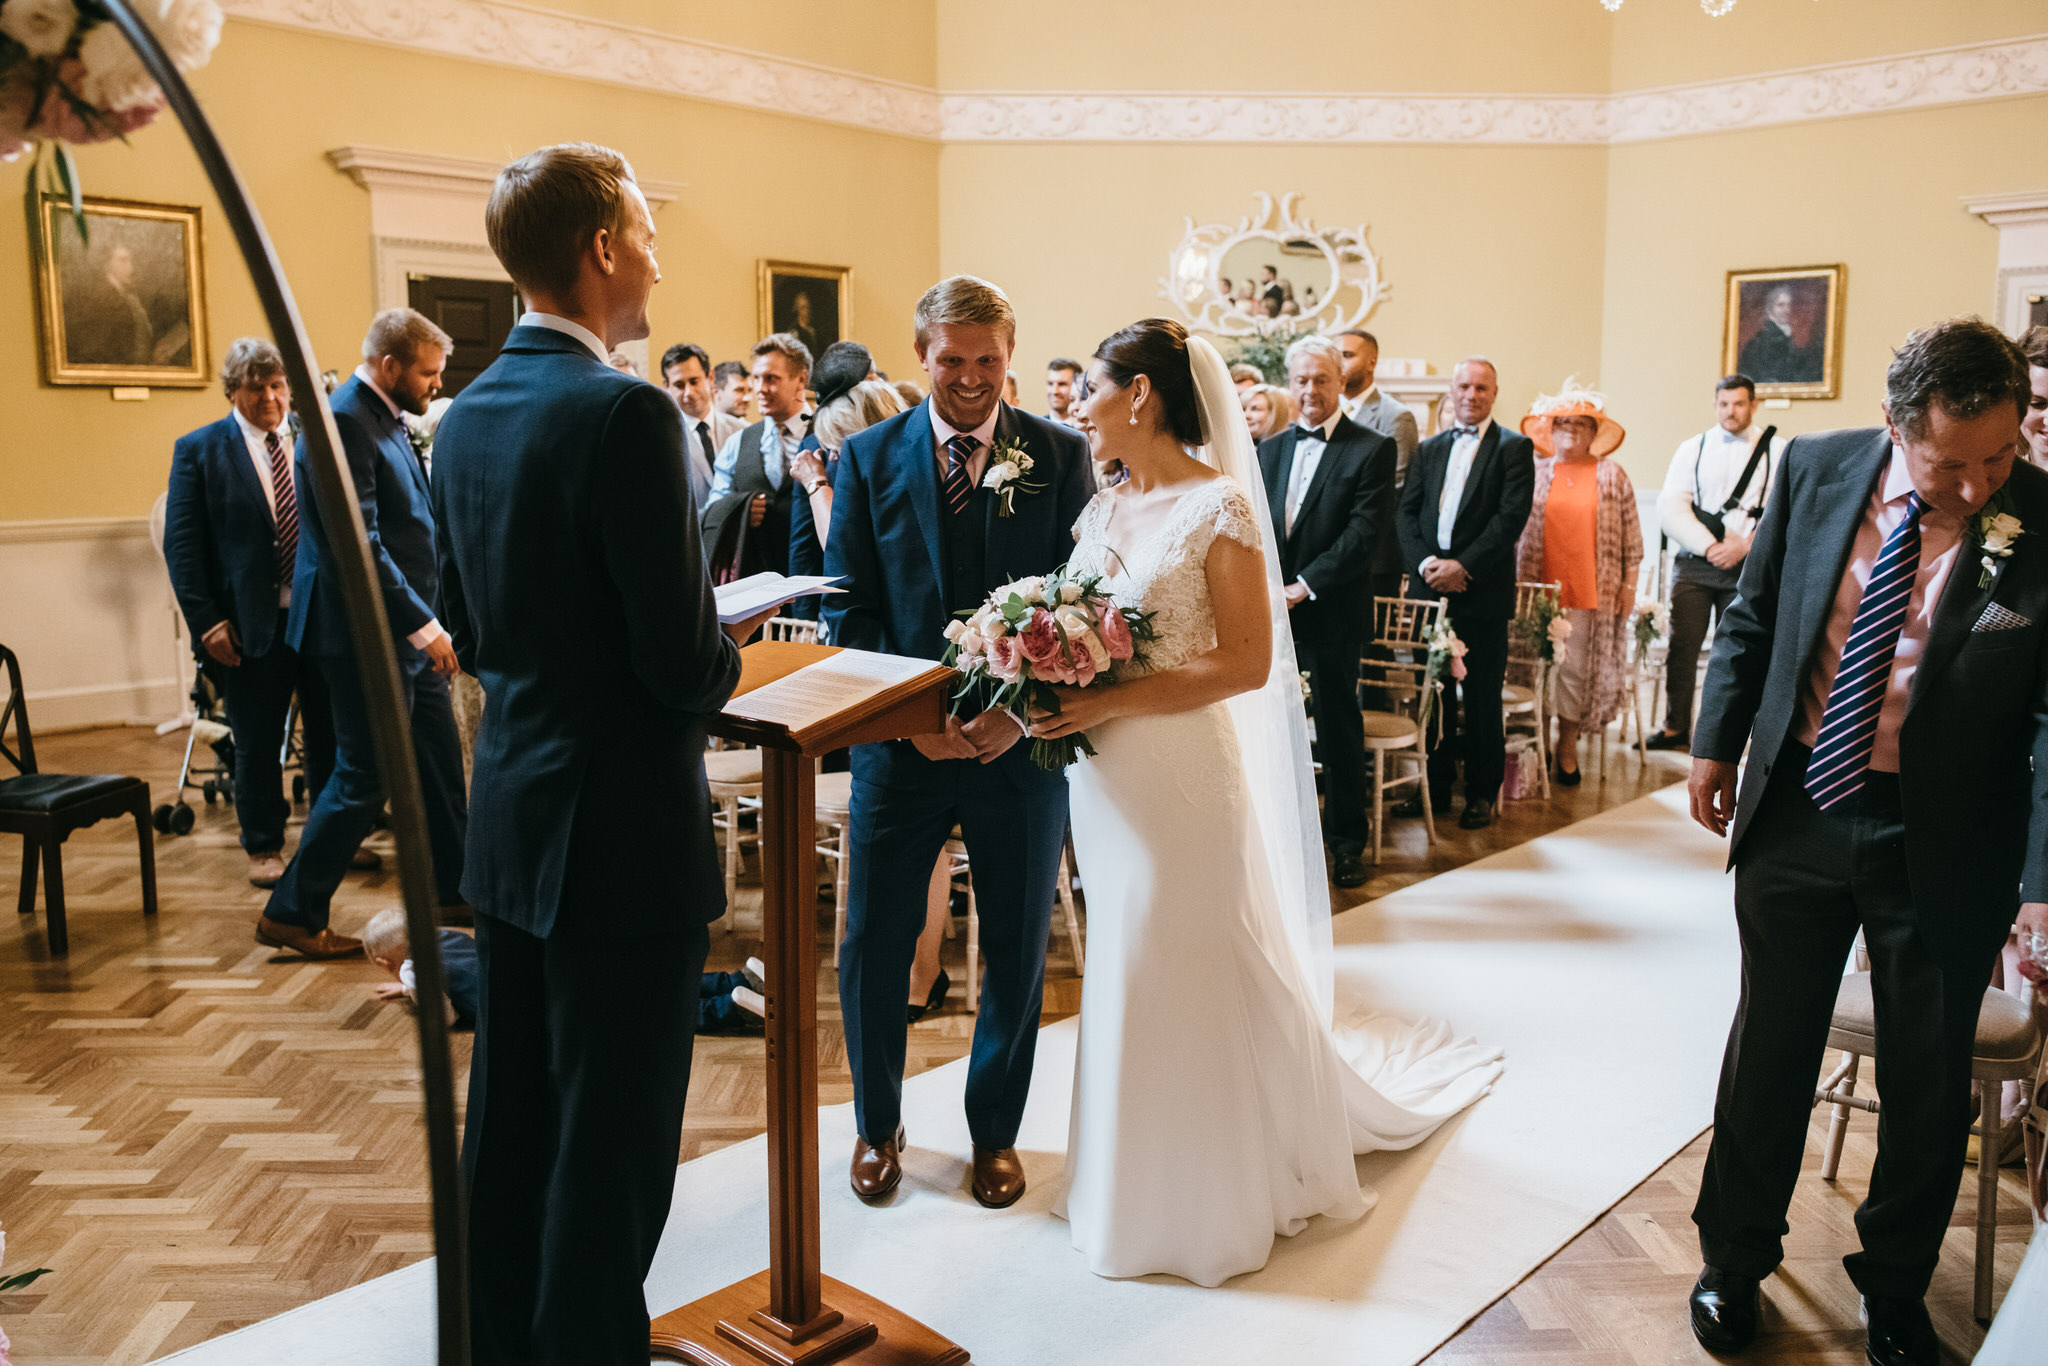 Wedding ceremony at the Assembly Rooms, Bath